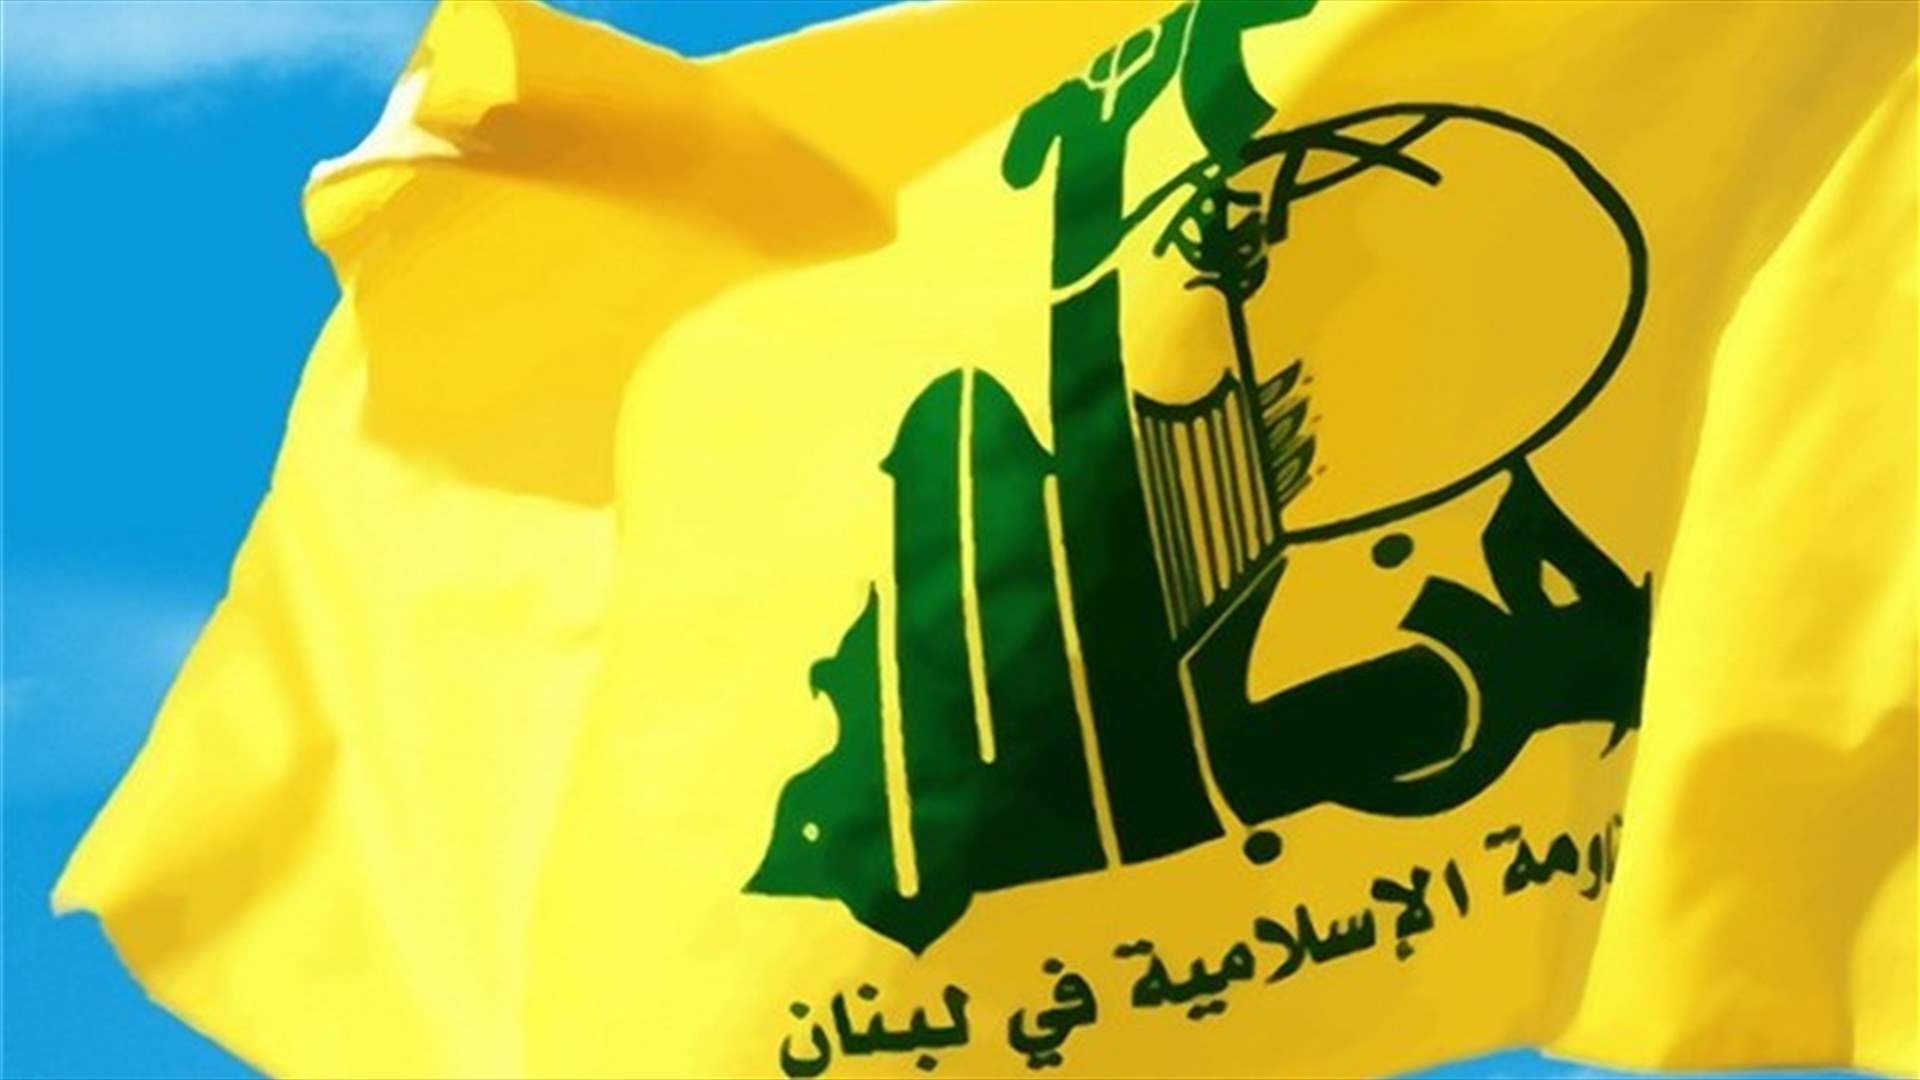 Hezbollah condemns AUB&#39;s prof. stance on &quot;enemy&quot;  